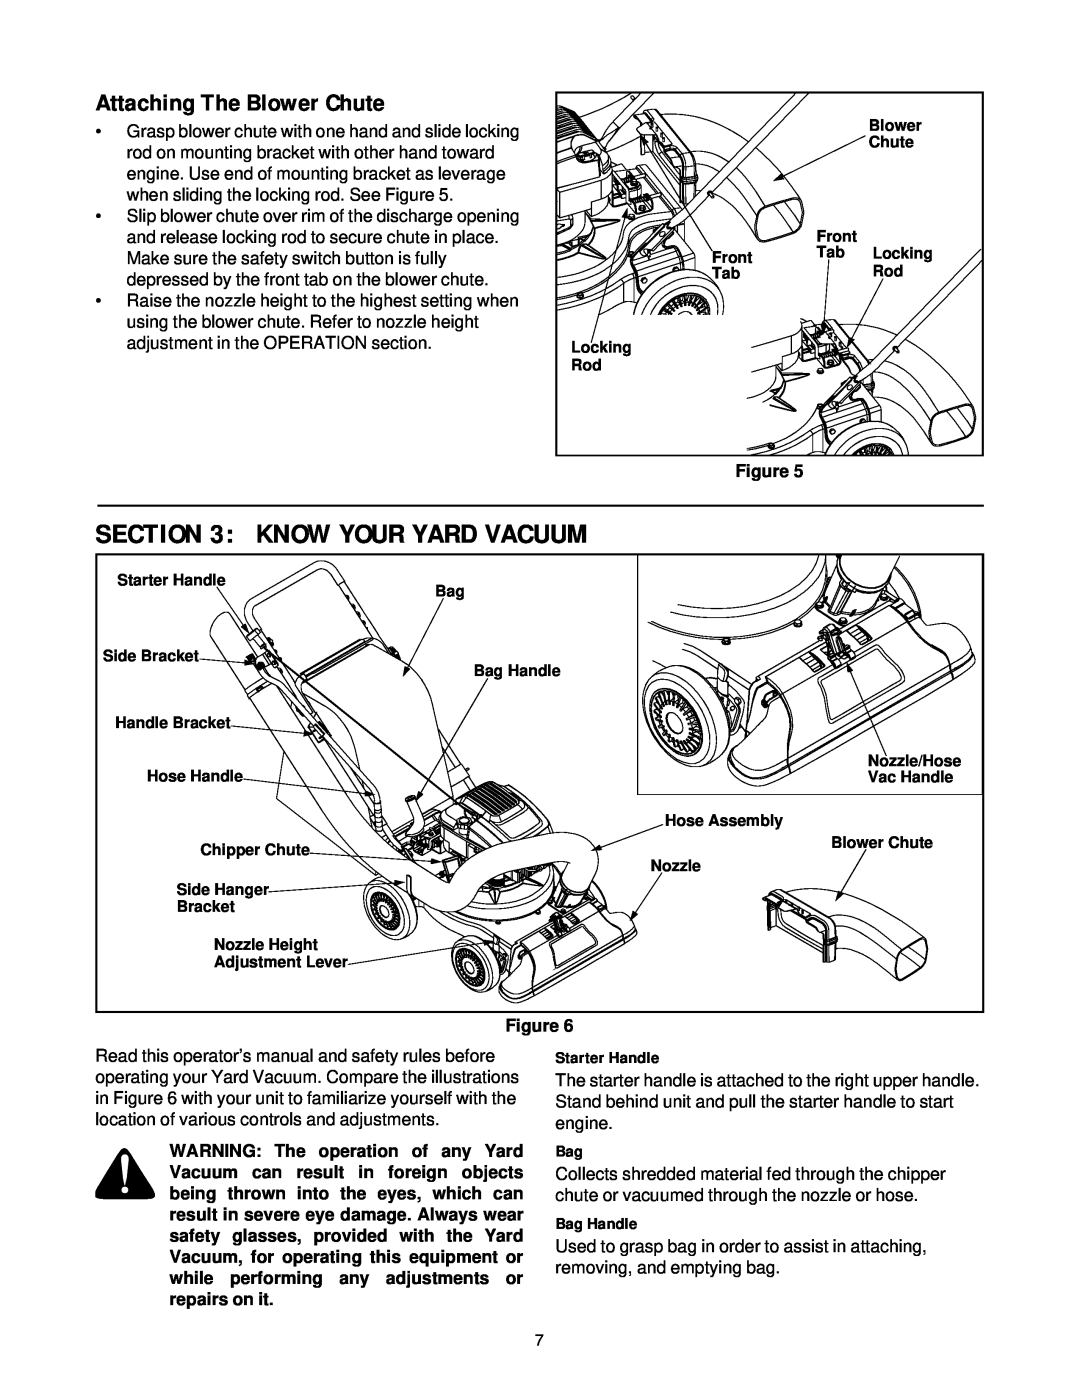 Yard-Man 247.77038 manual Attaching The Blower Chute, Know Your Yard Vacuum, Starter Handle, Bag Handle 